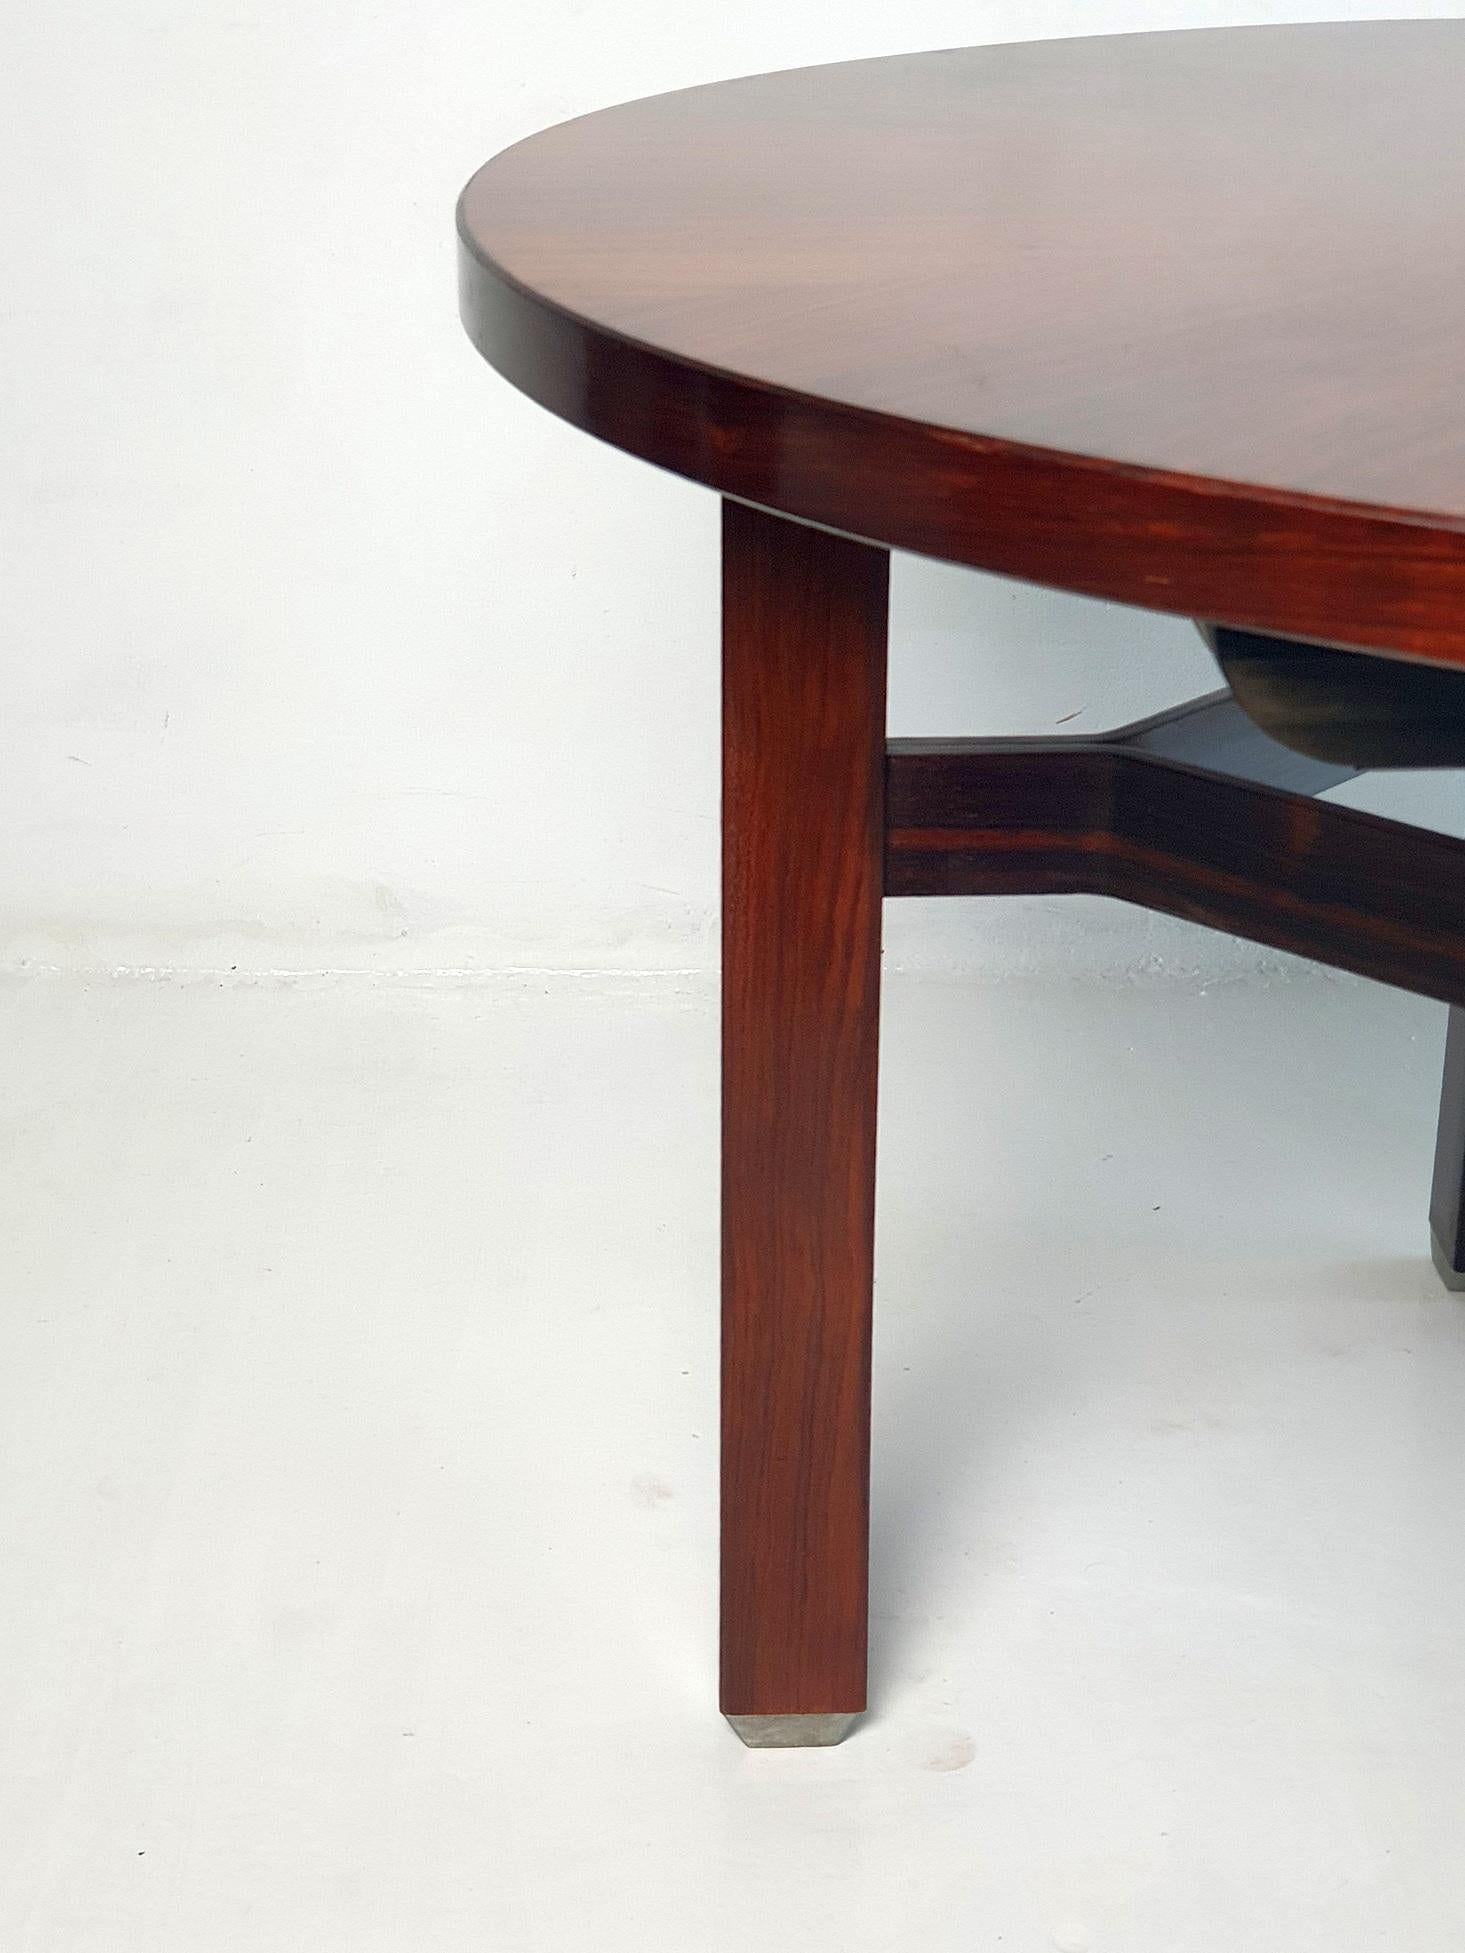 20th Century Mid-Century Modern Round Extendable Dining Table by Ico Parisi for Mim Italy For Sale